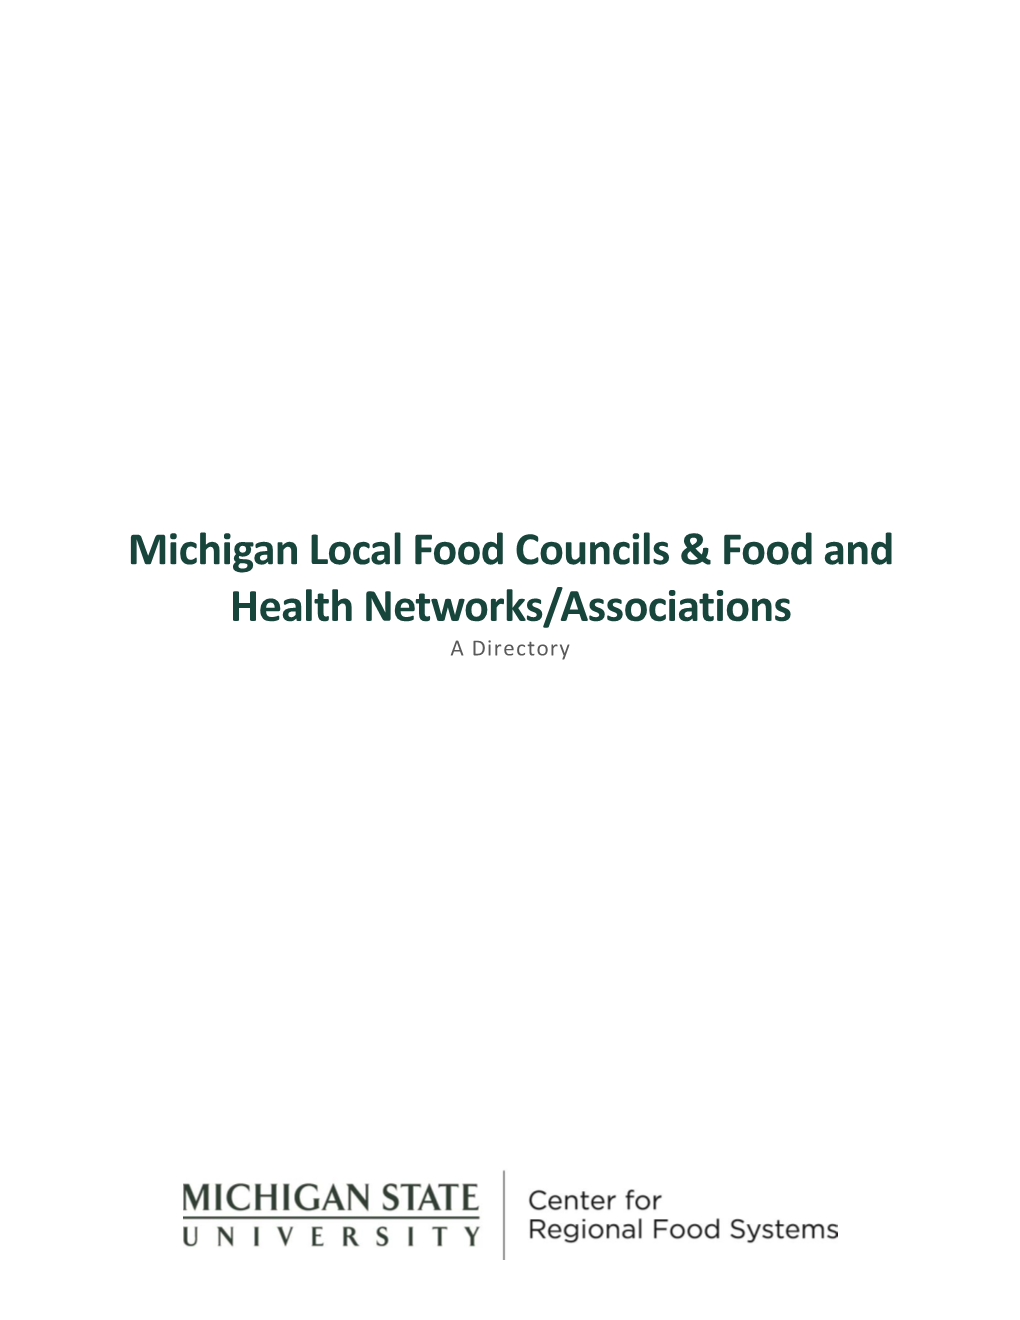 Michigan Local Food Councils & Food and Health Networks/Associations